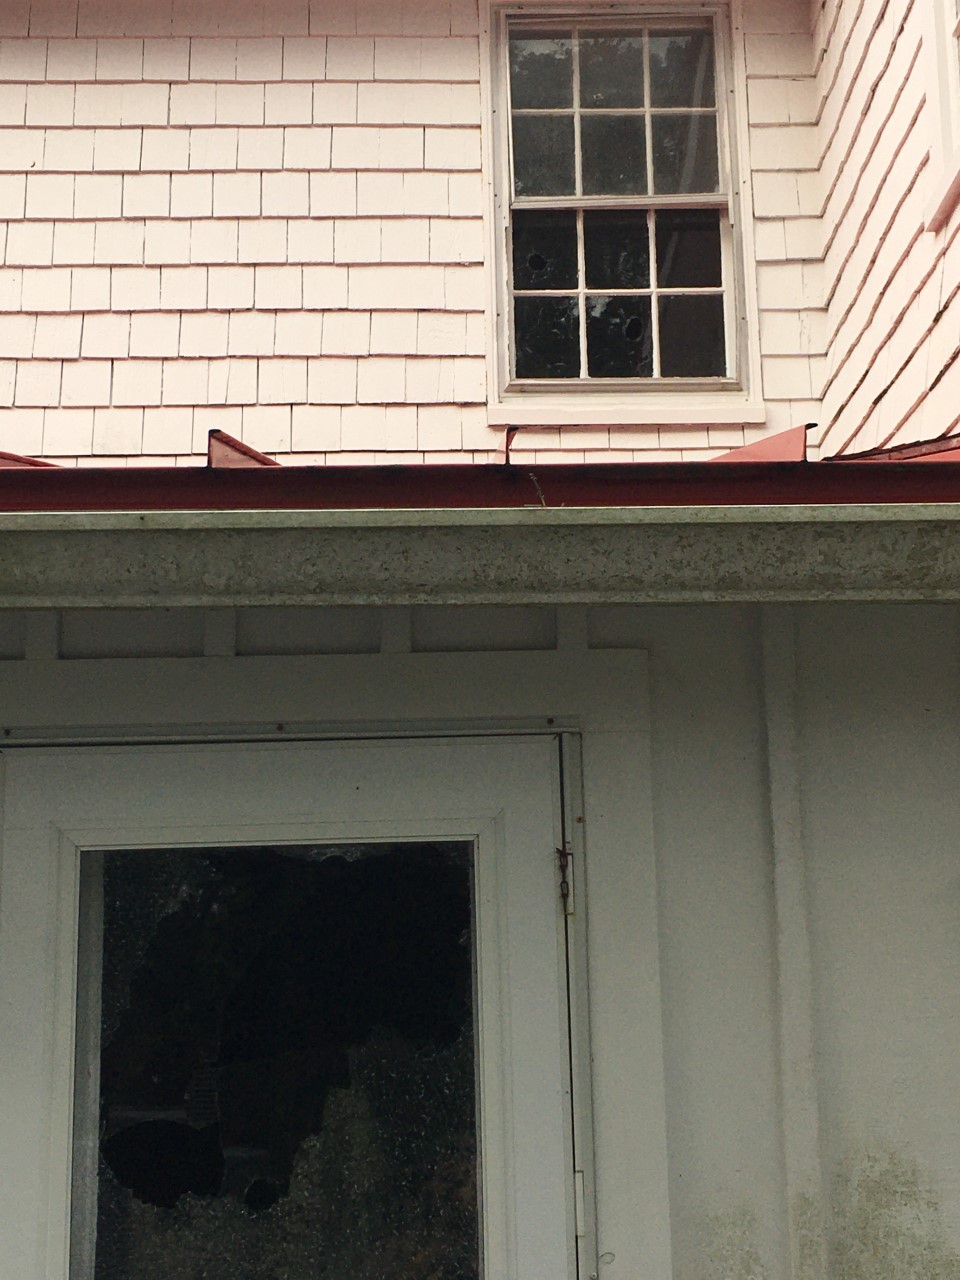 Damage to door and window at Ocracoke Light Station.